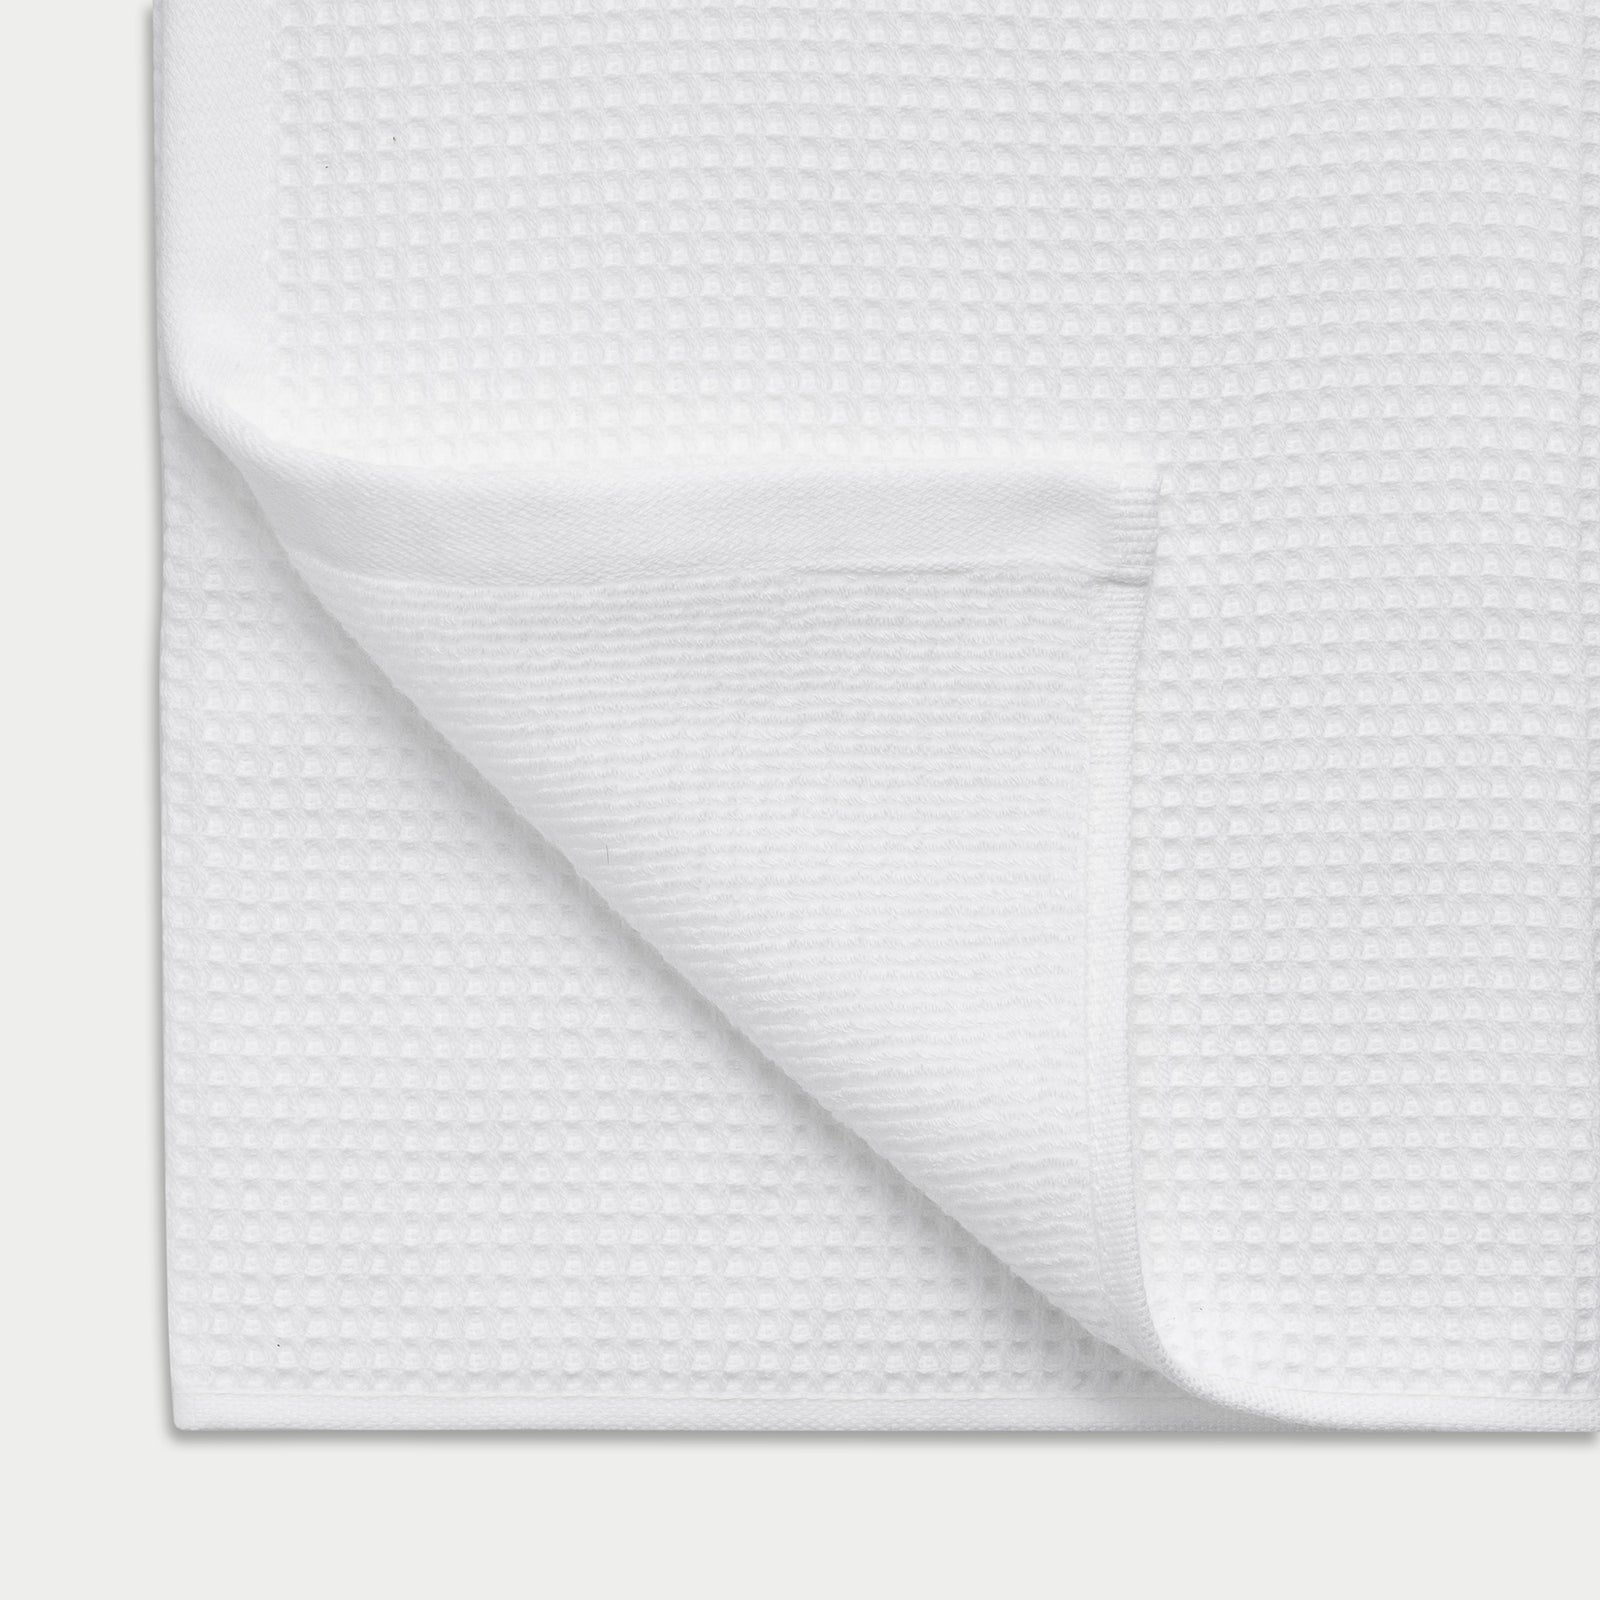 Waffle Bath Towel in the color White. Photo of White Waffle Bath Towel taken as a close up of the Waffle Bath Towel. The picture shows the corner of the towel and a white background 